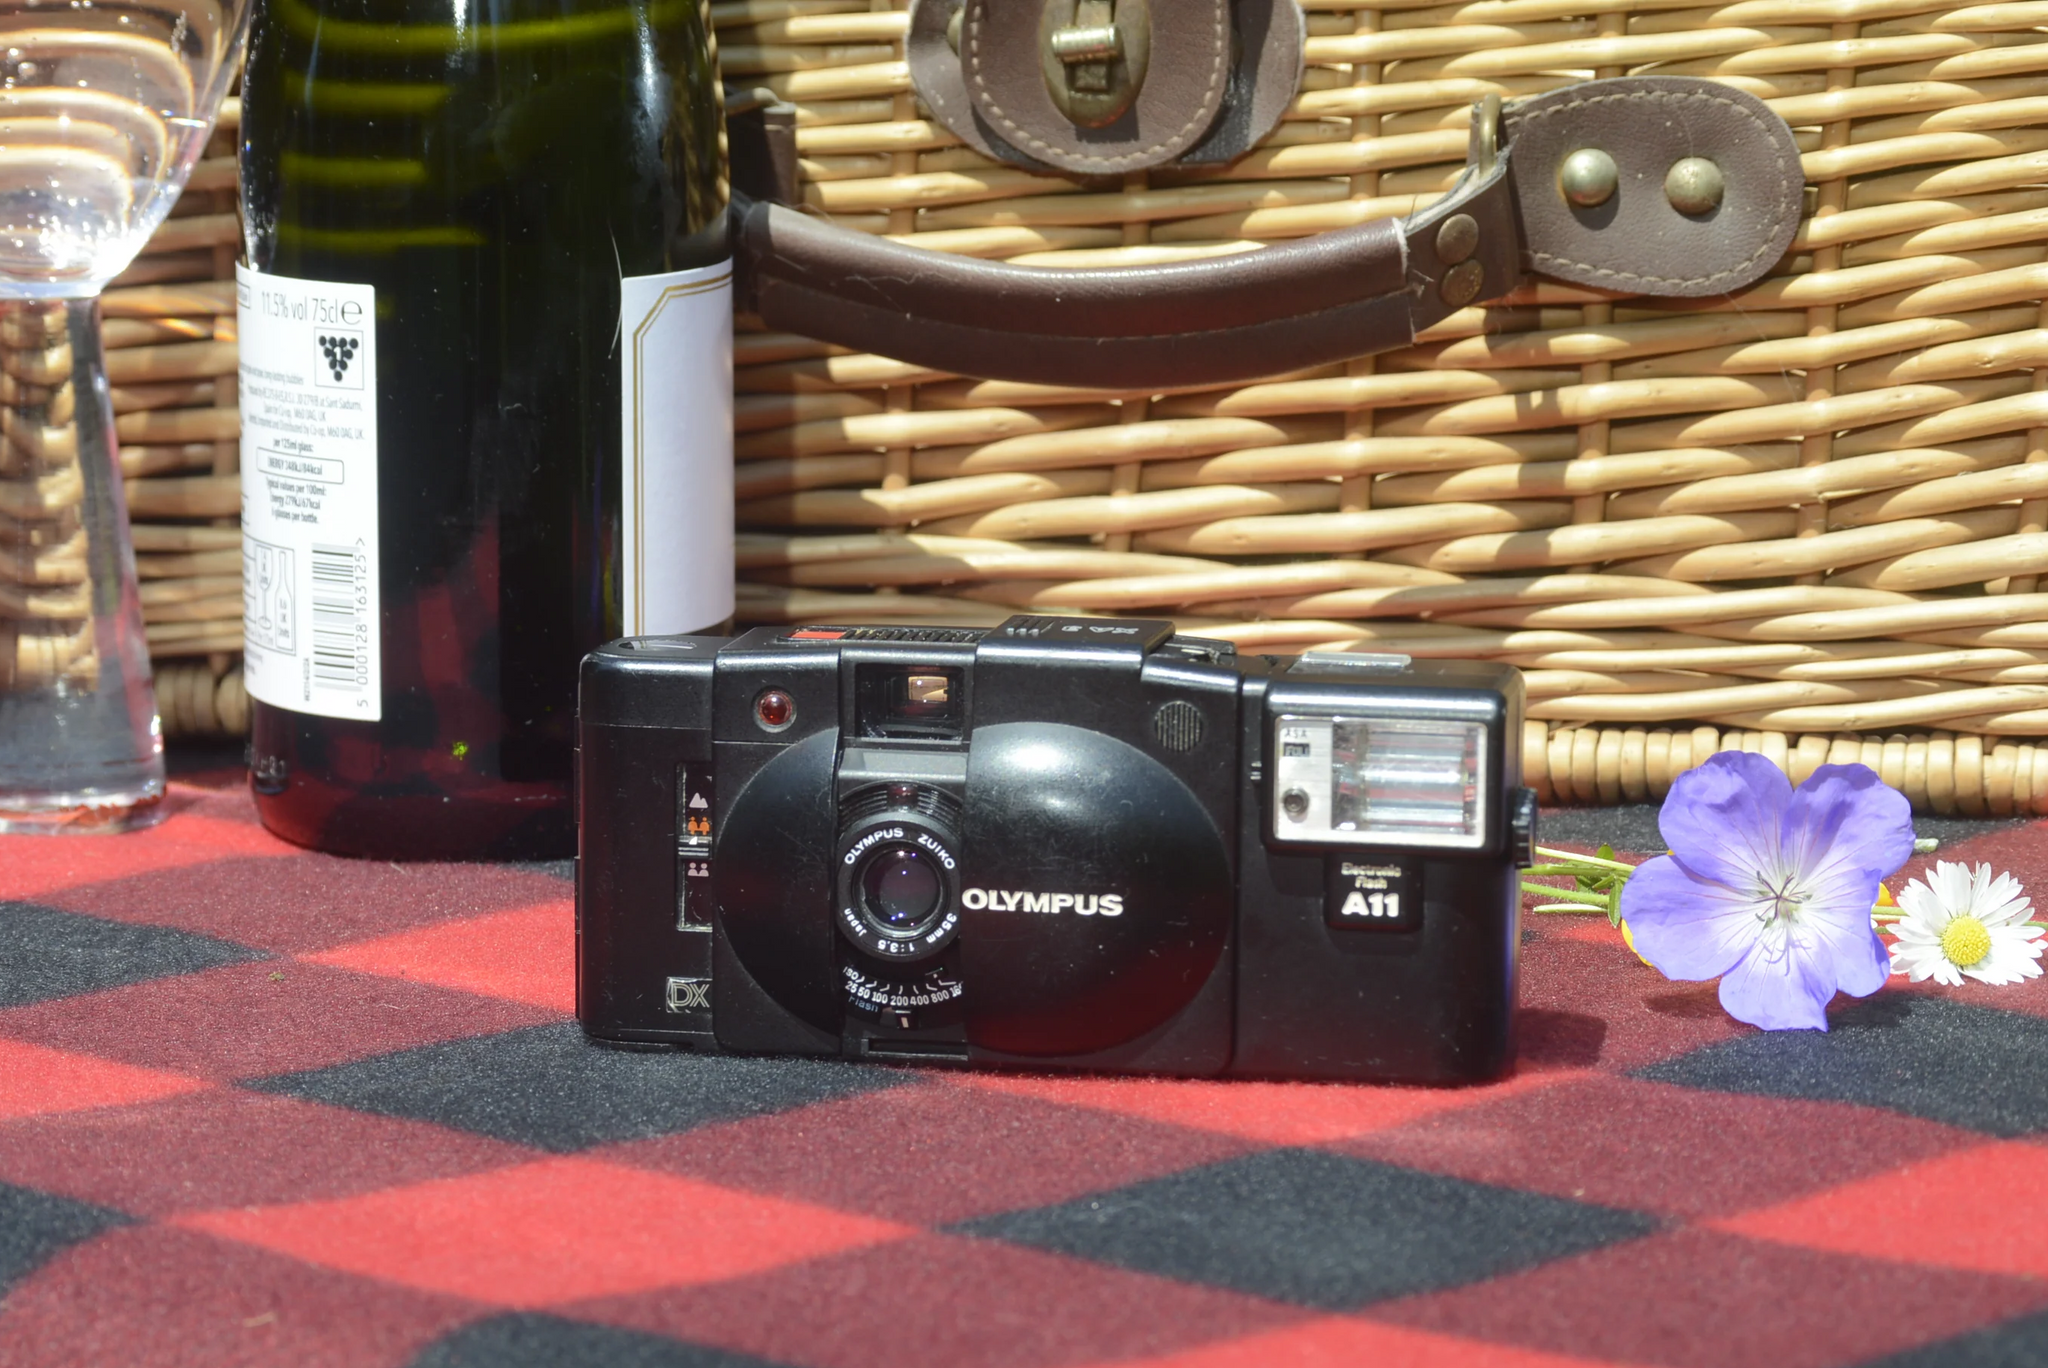 Stunning Olympus XA3 with A1L flash. A beautiful compact camera. Great for smaller hands! - Rewind Cameras 